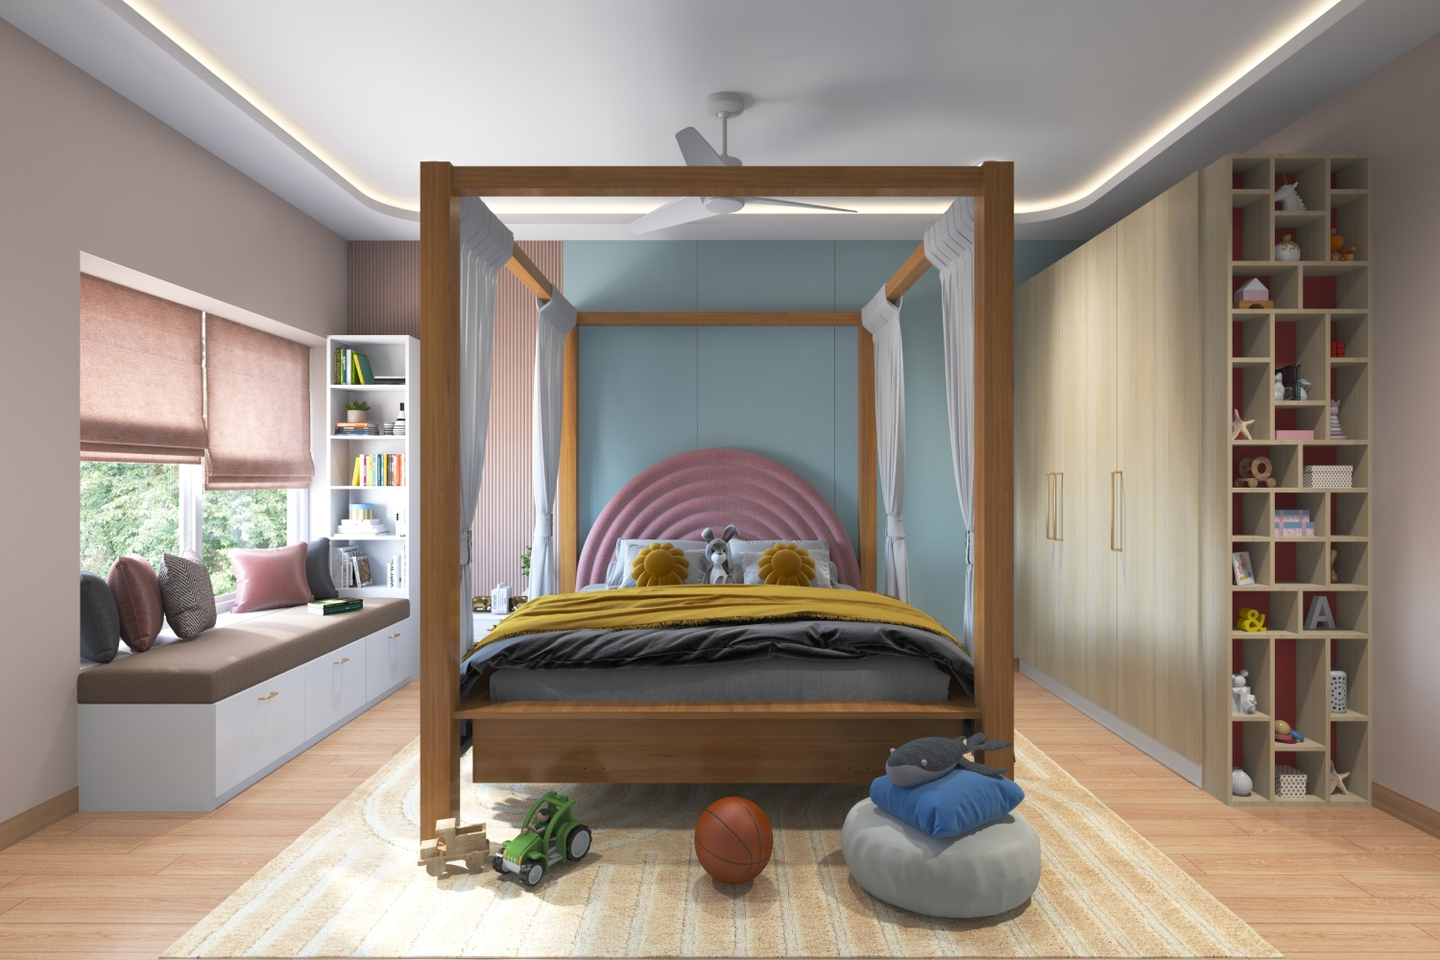 Kids' Bedroom Design With A Wooden Bed And Dual-Tone Wall Panels - Livspace